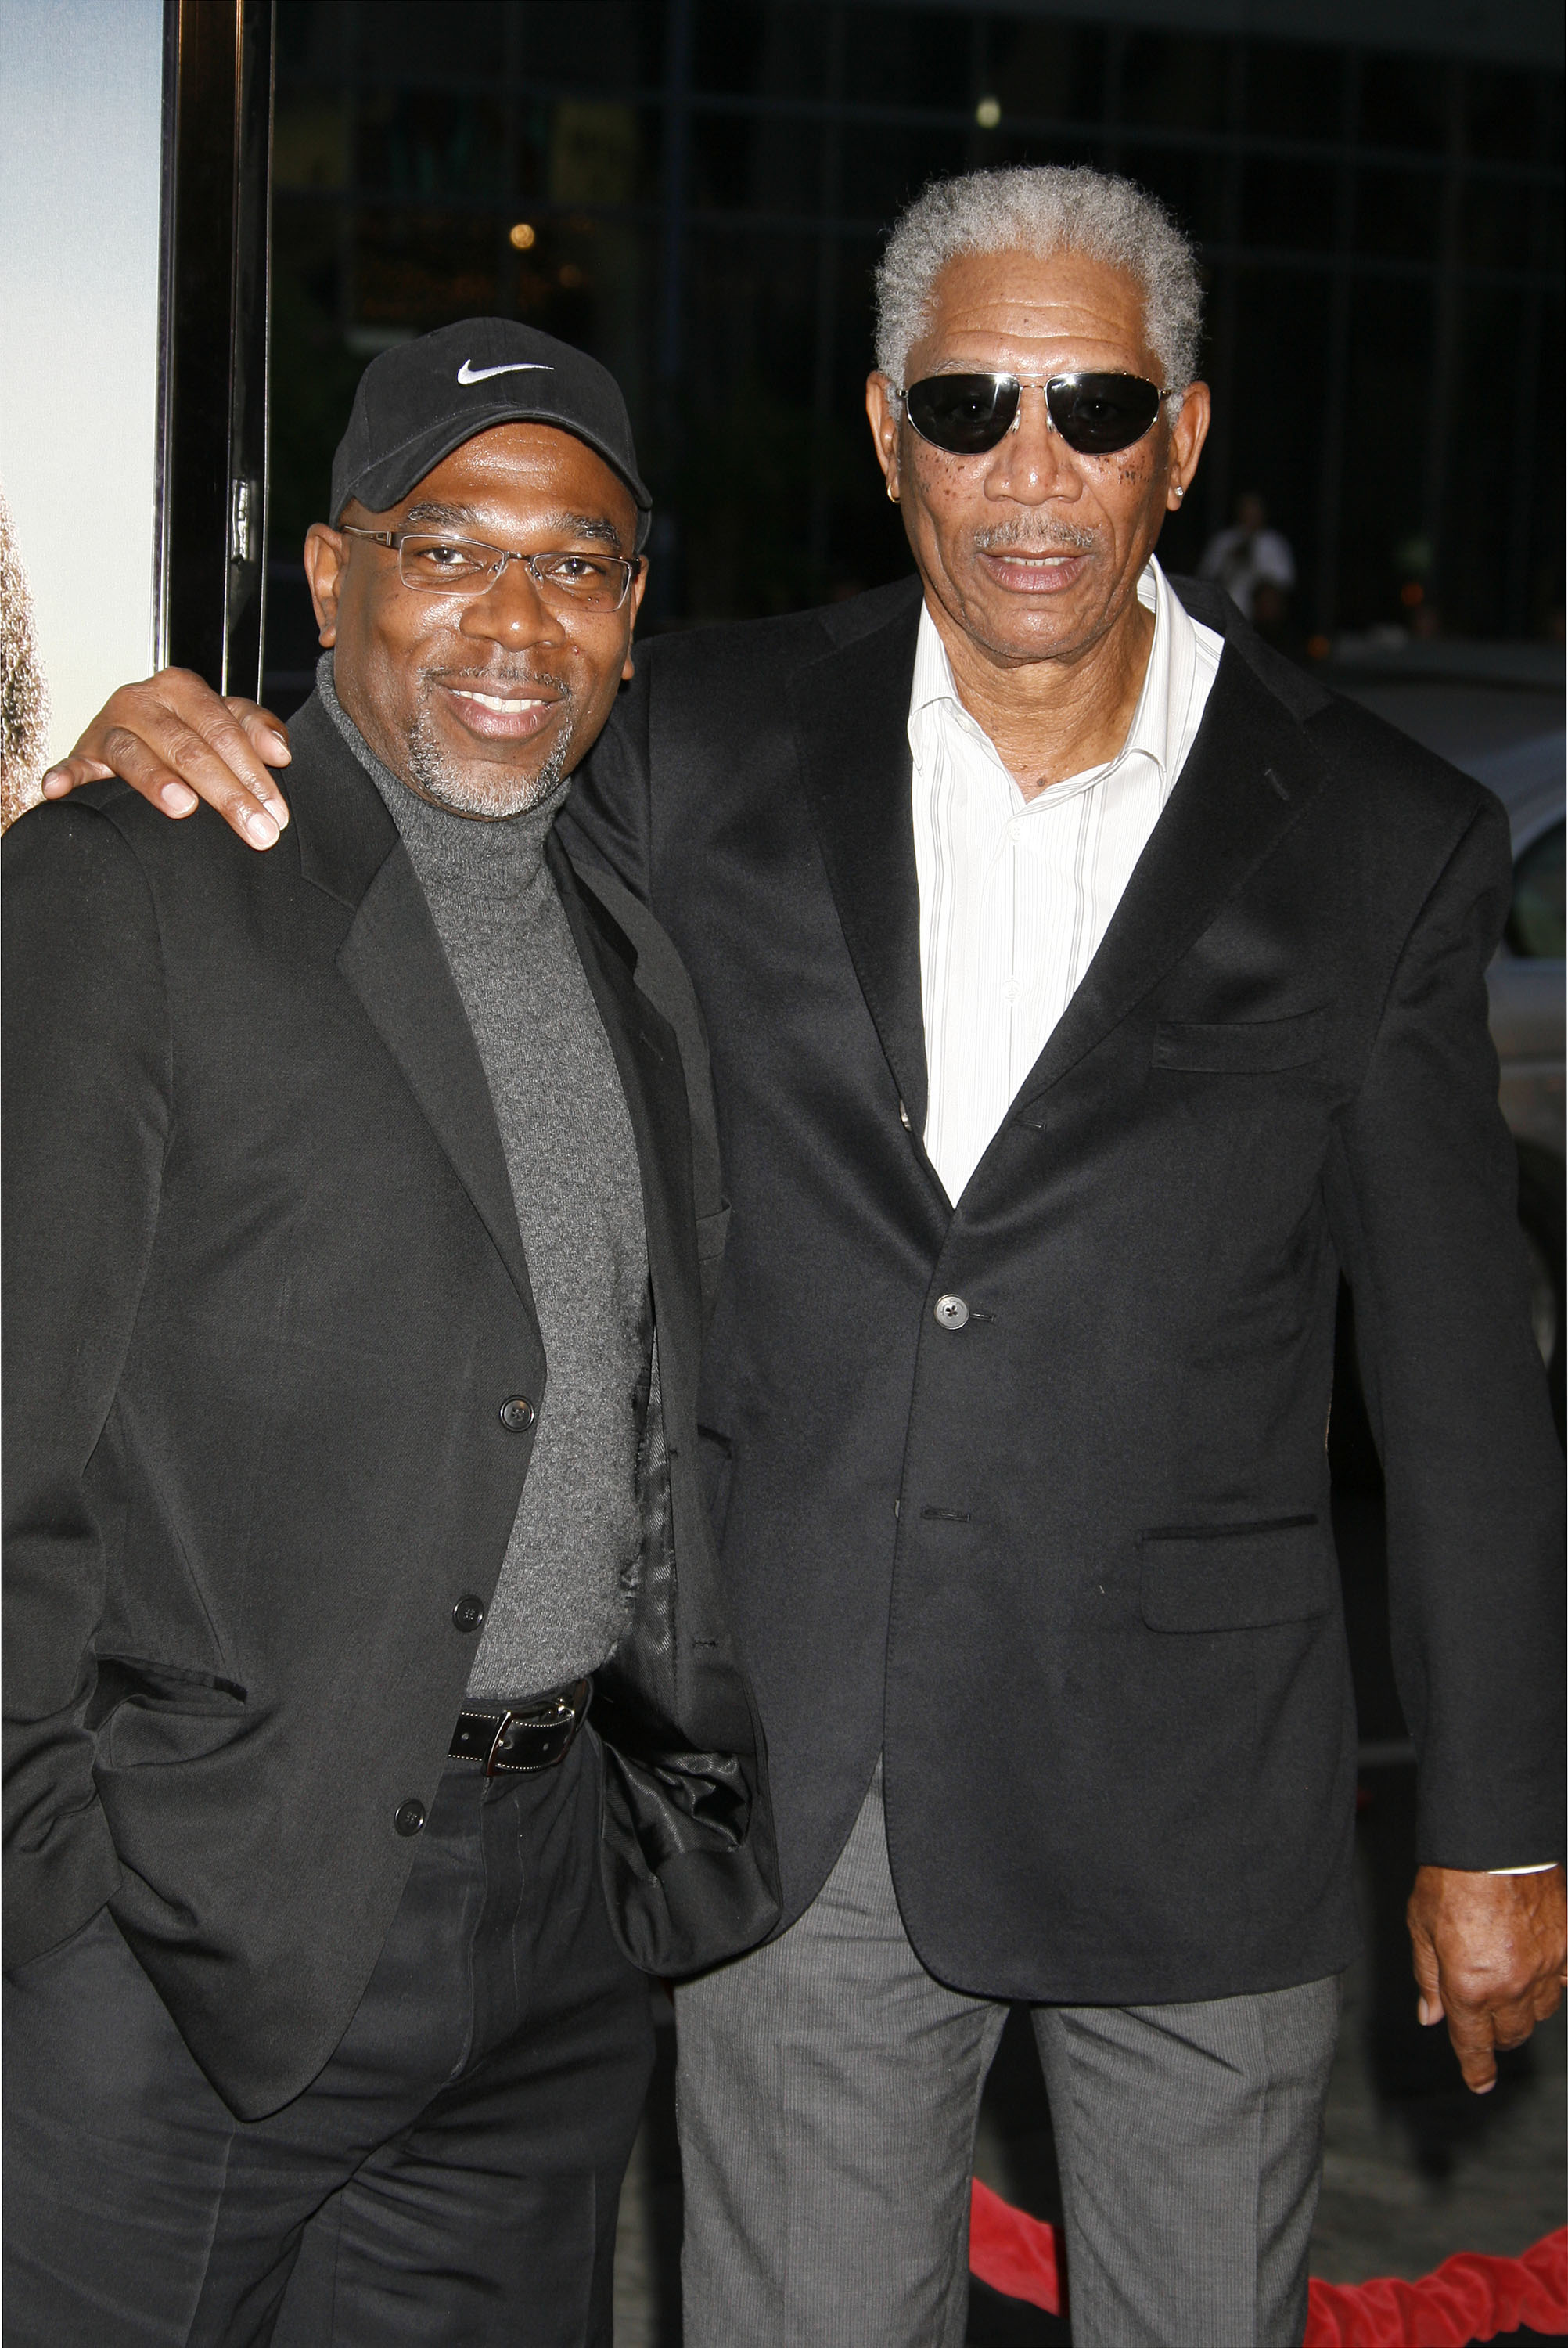 Alfonso and Morgan Freeman at the premiere of "The Bucket List" in Hollywood, California on December 16, 2007 | Source: Getty Images